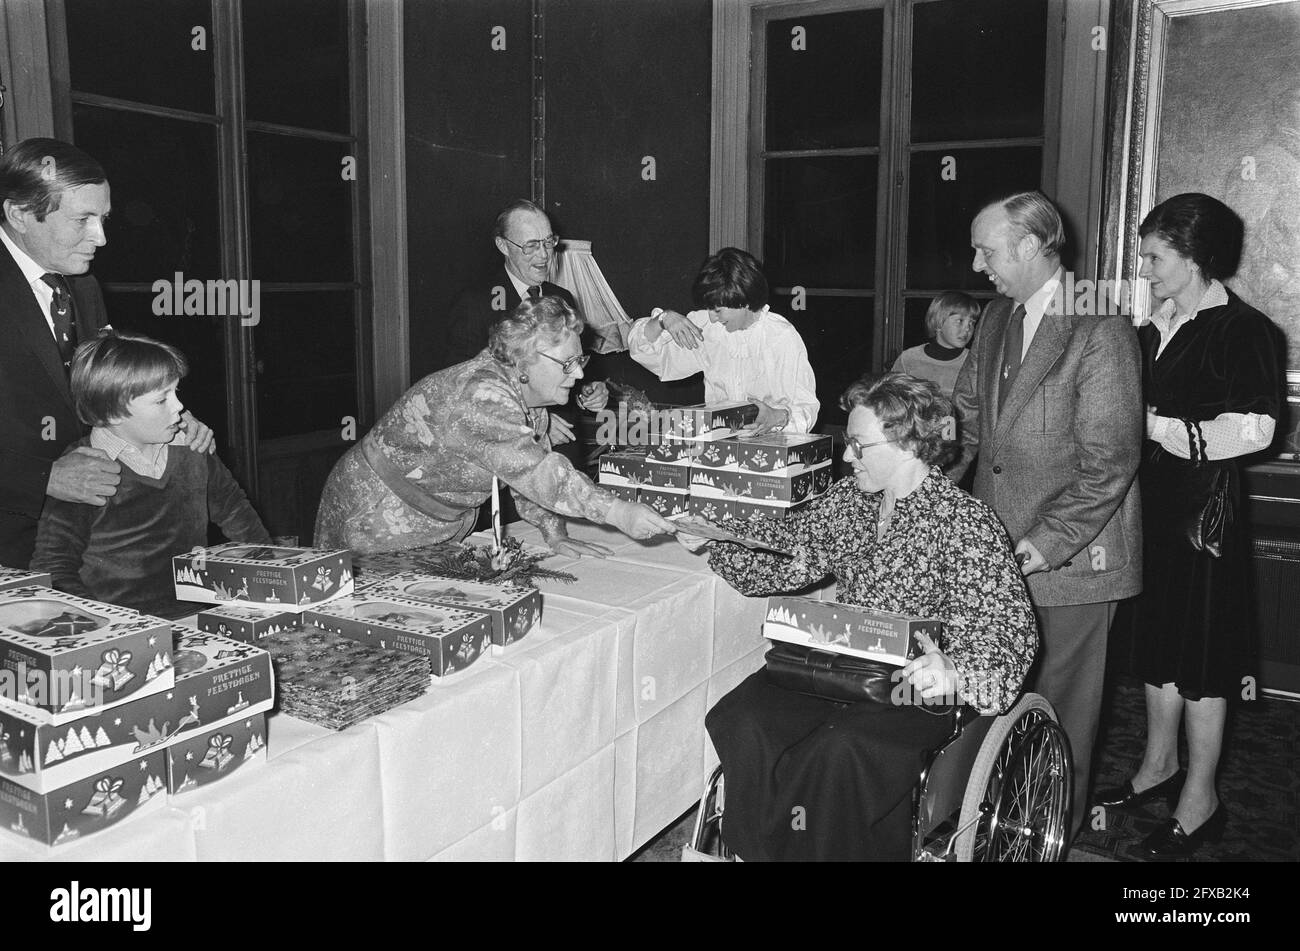 Christmas celebration Royal family in Apeldoorn; Royal family during distribution of Christmas packages, December 20, 1978, Christmas celebrations, families, Christmas packages, The Netherlands, 20th century press agency photo, news to remember, documentary, historic photography 1945-1990, visual stories, human history of the Twentieth Century, capturing moments in time Stock Photo